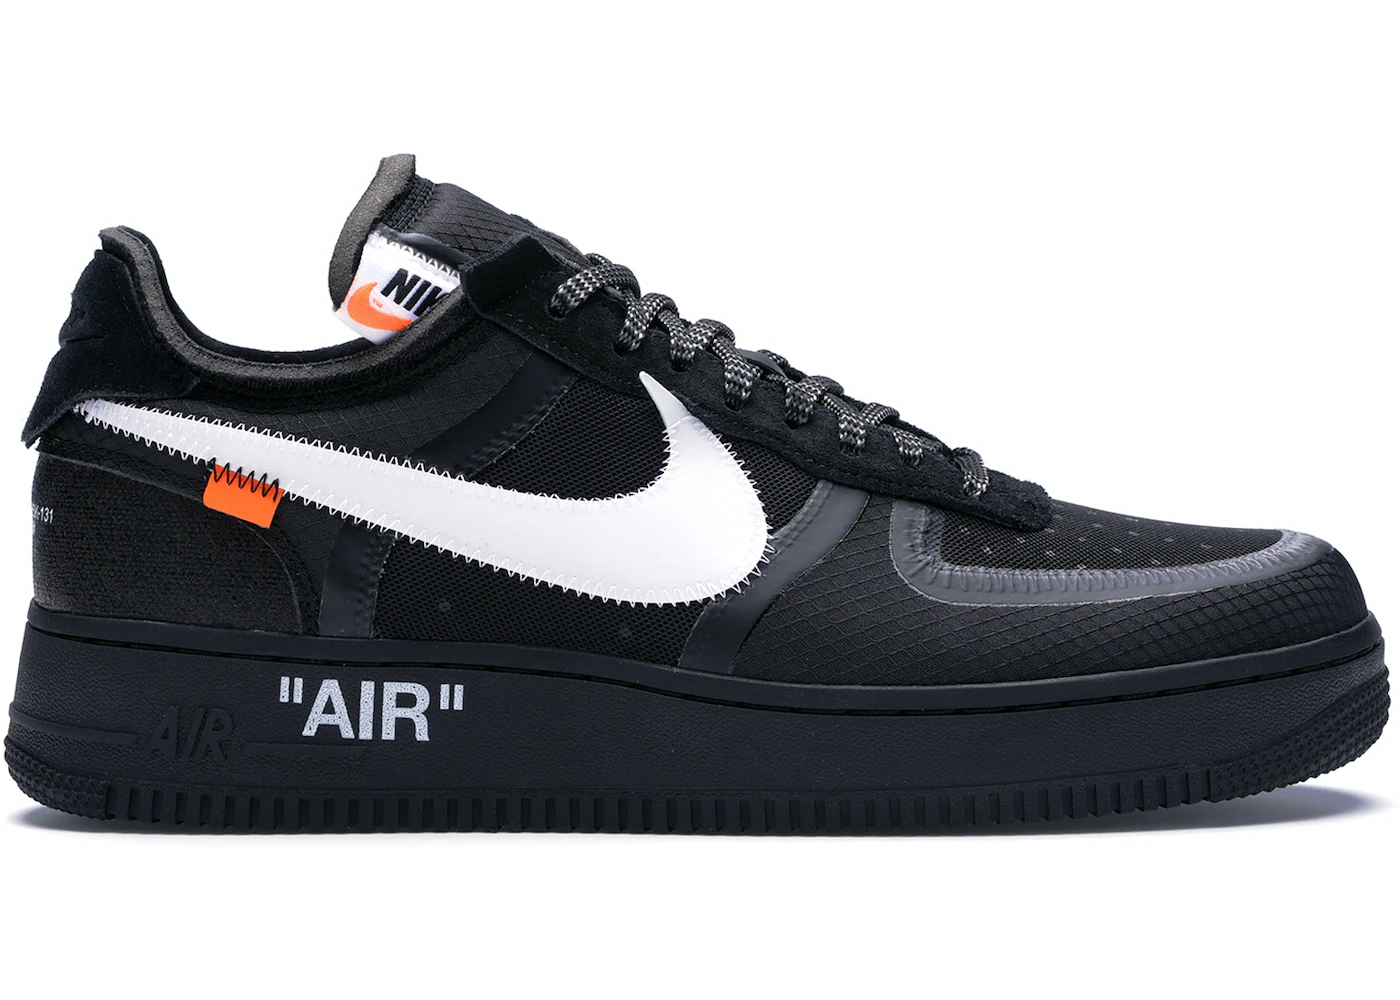 Aggregaat Kano Monopoly Nike Air Force 1 Low Off-White Black White Men's - AO4606-001 - US